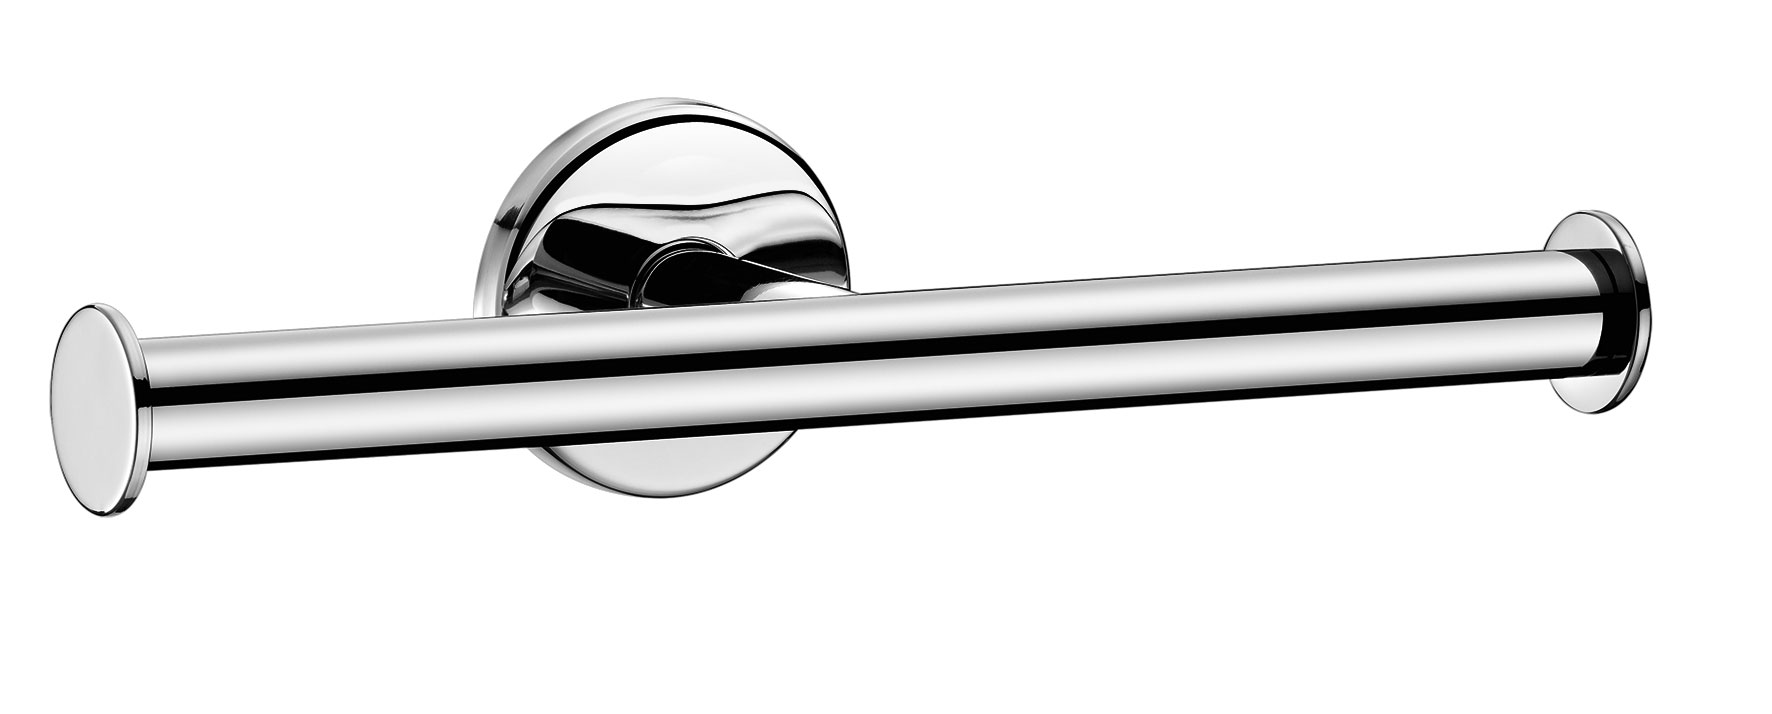 Delabie double toilet roll holder bright polished stainless steel